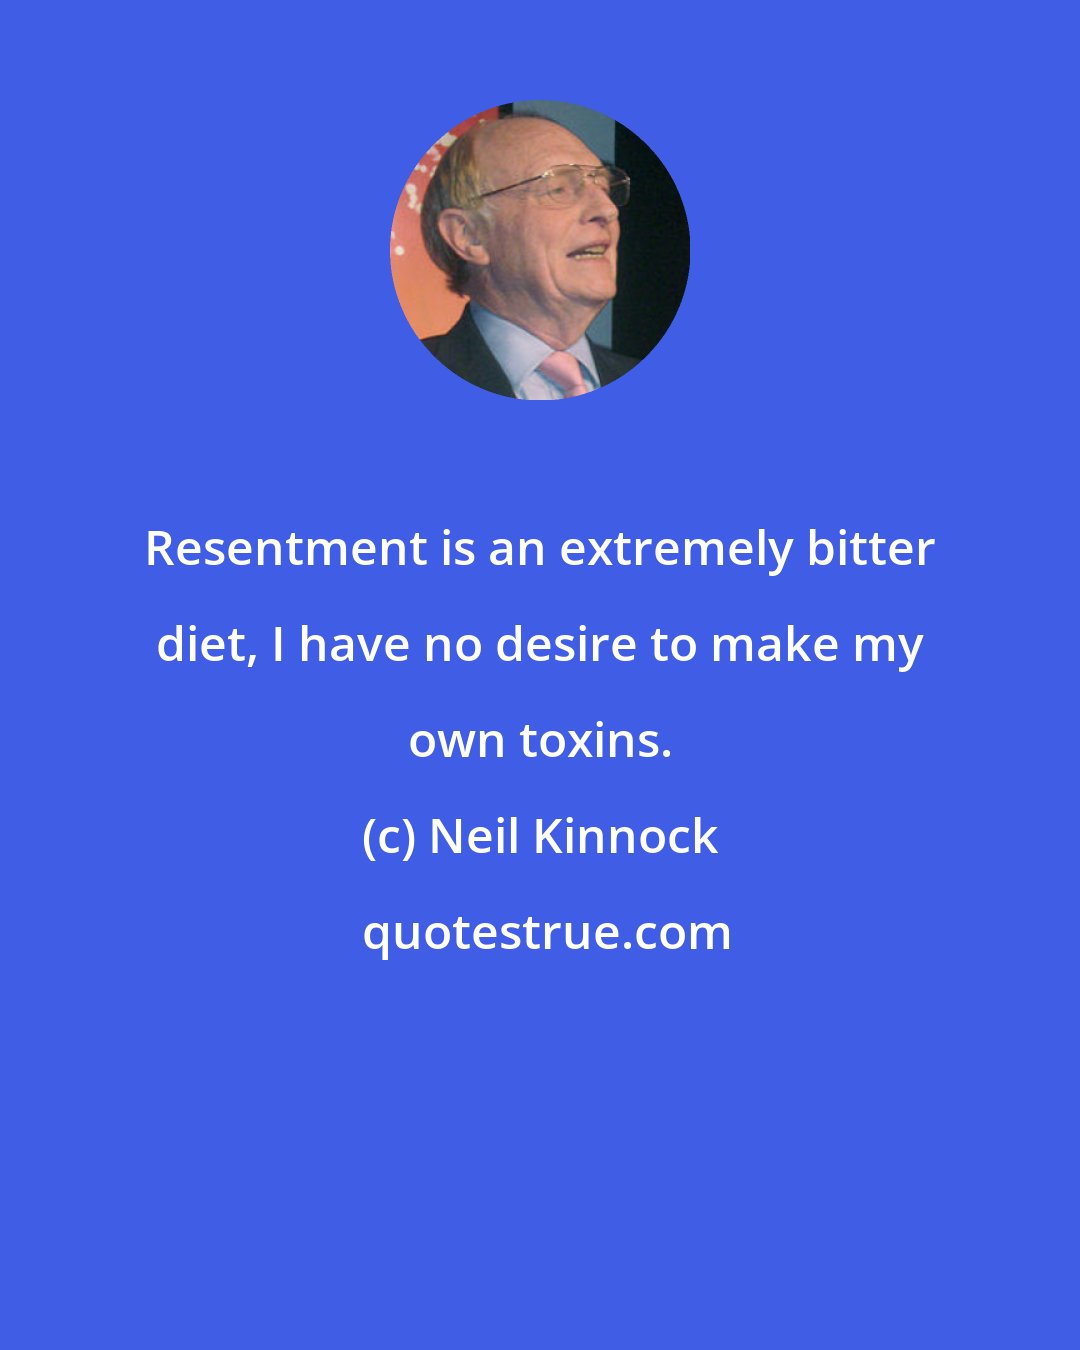 Neil Kinnock: Resentment is an extremely bitter diet, I have no desire to make my own toxins.